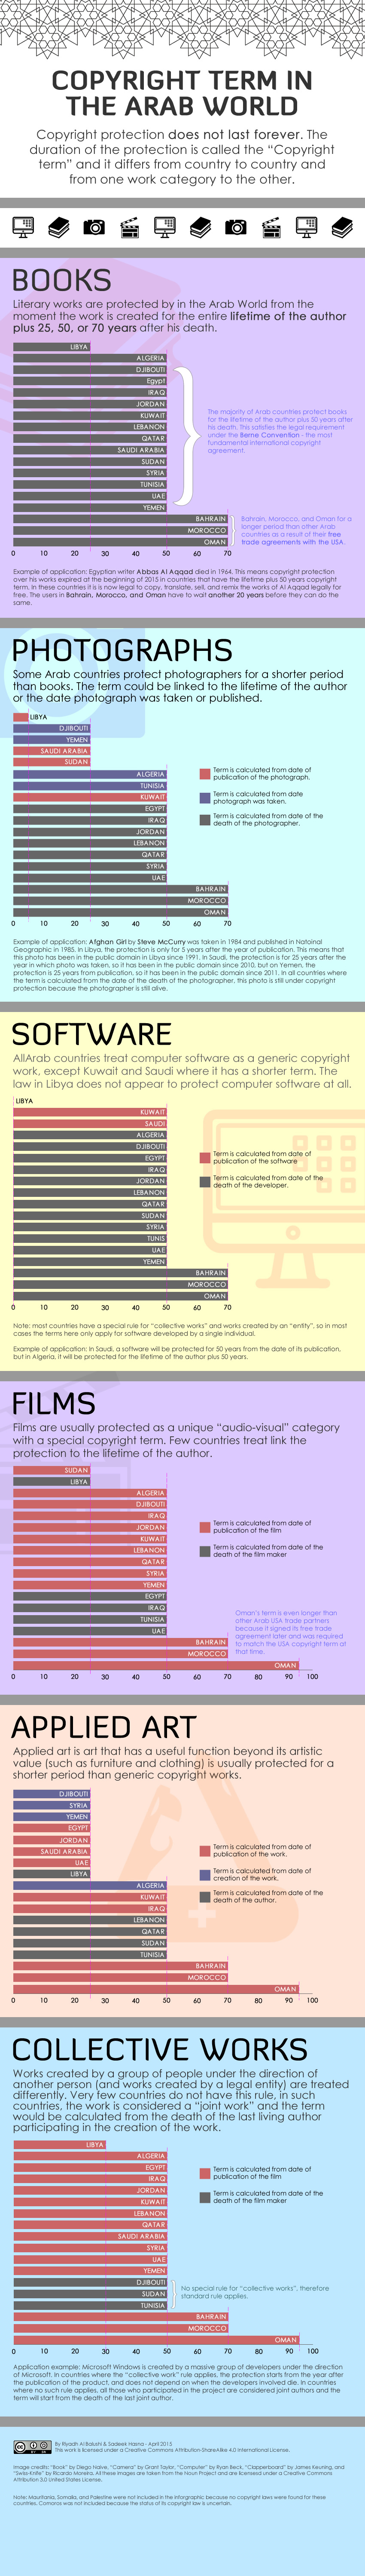 Copyright Term in the Arab World Infographic